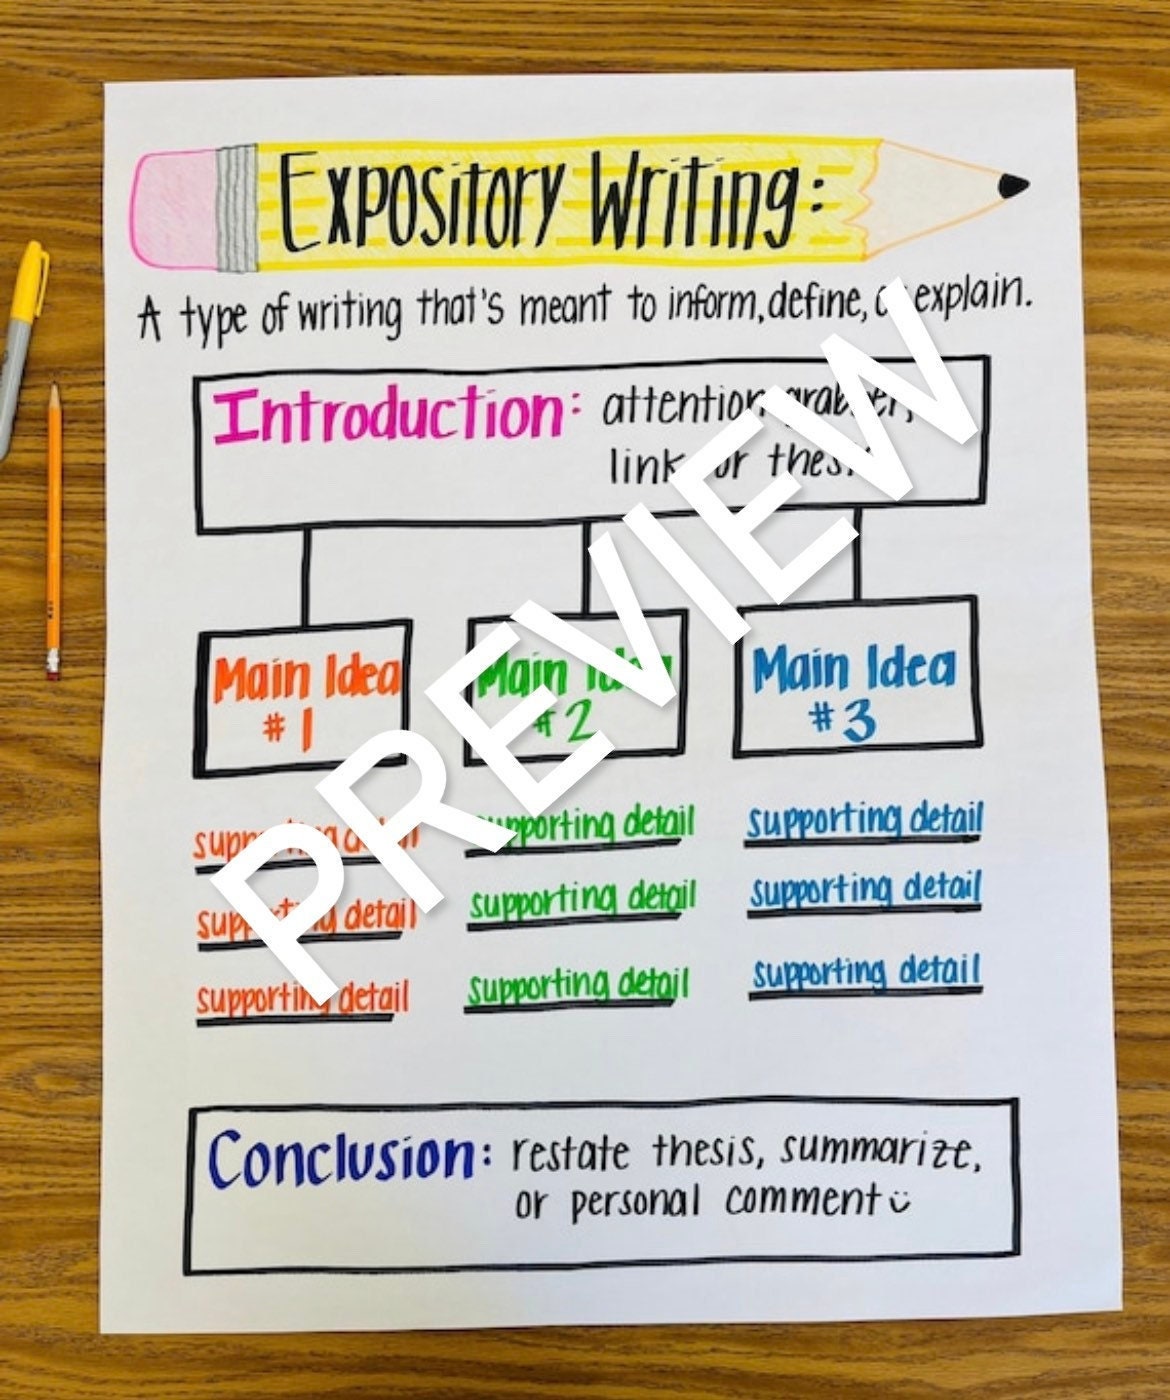 informational writing conclusion anchor chart